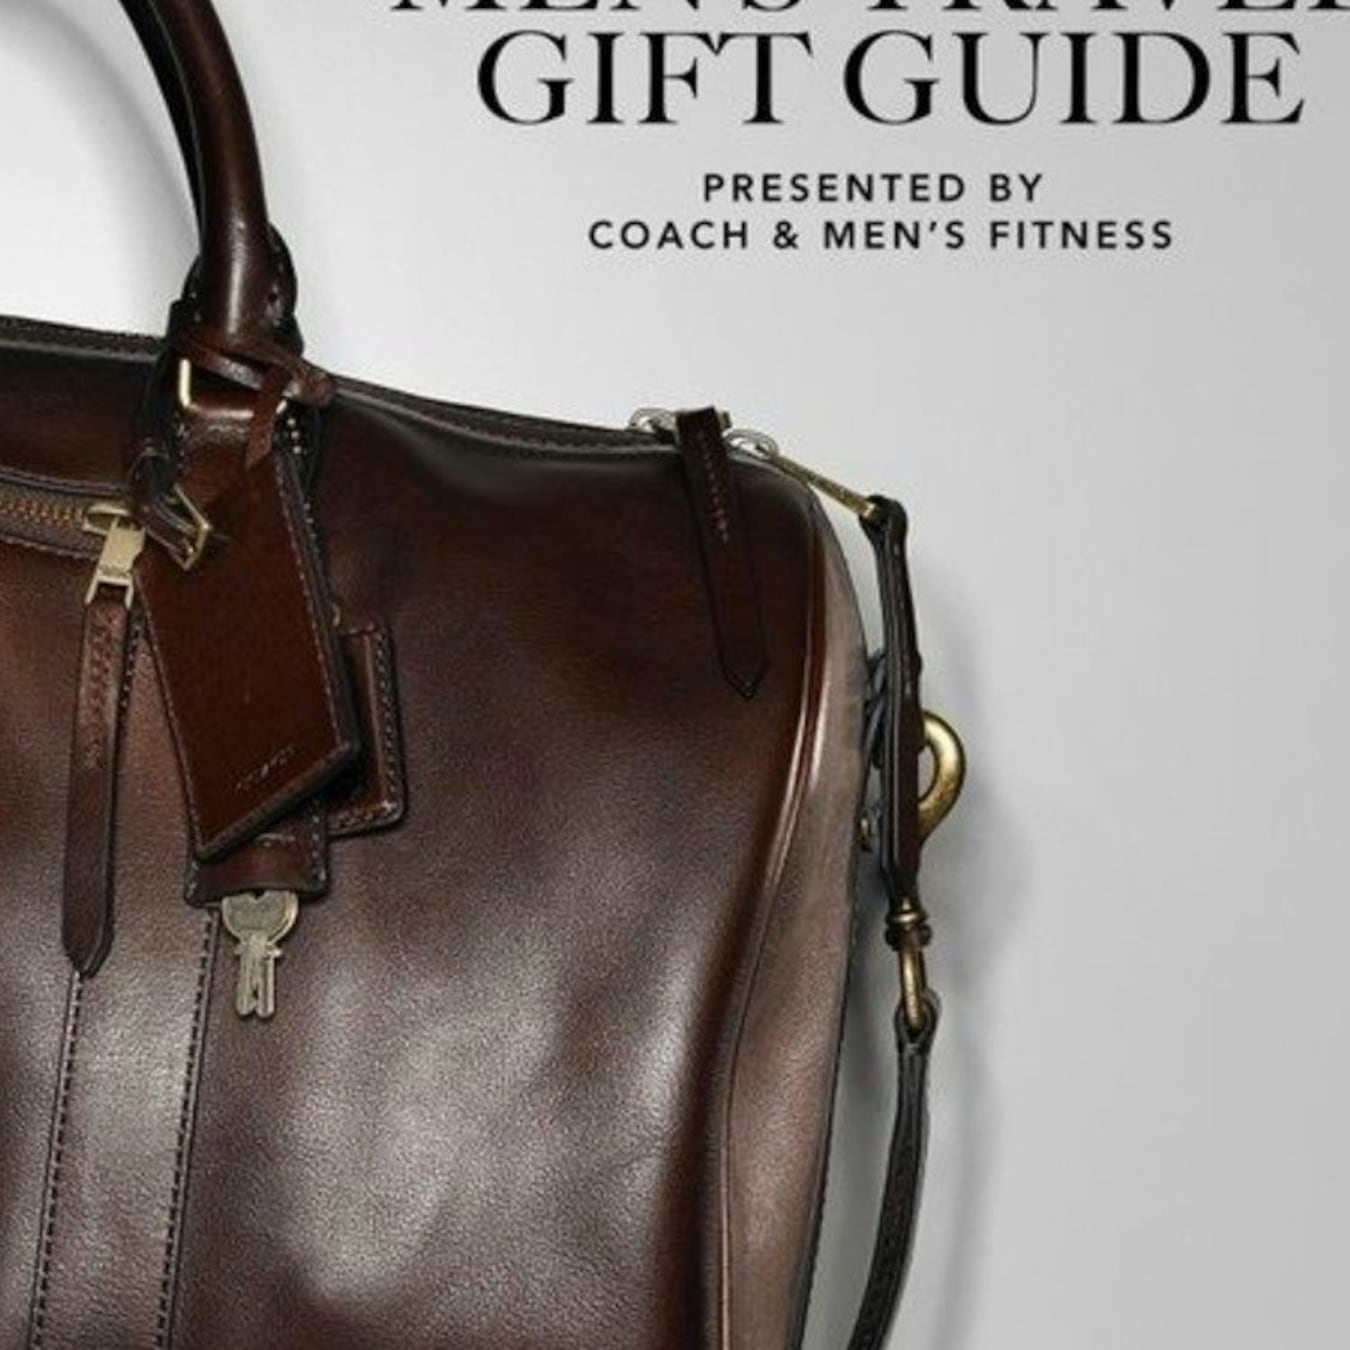 Project-The Men's Travel Gift Guide